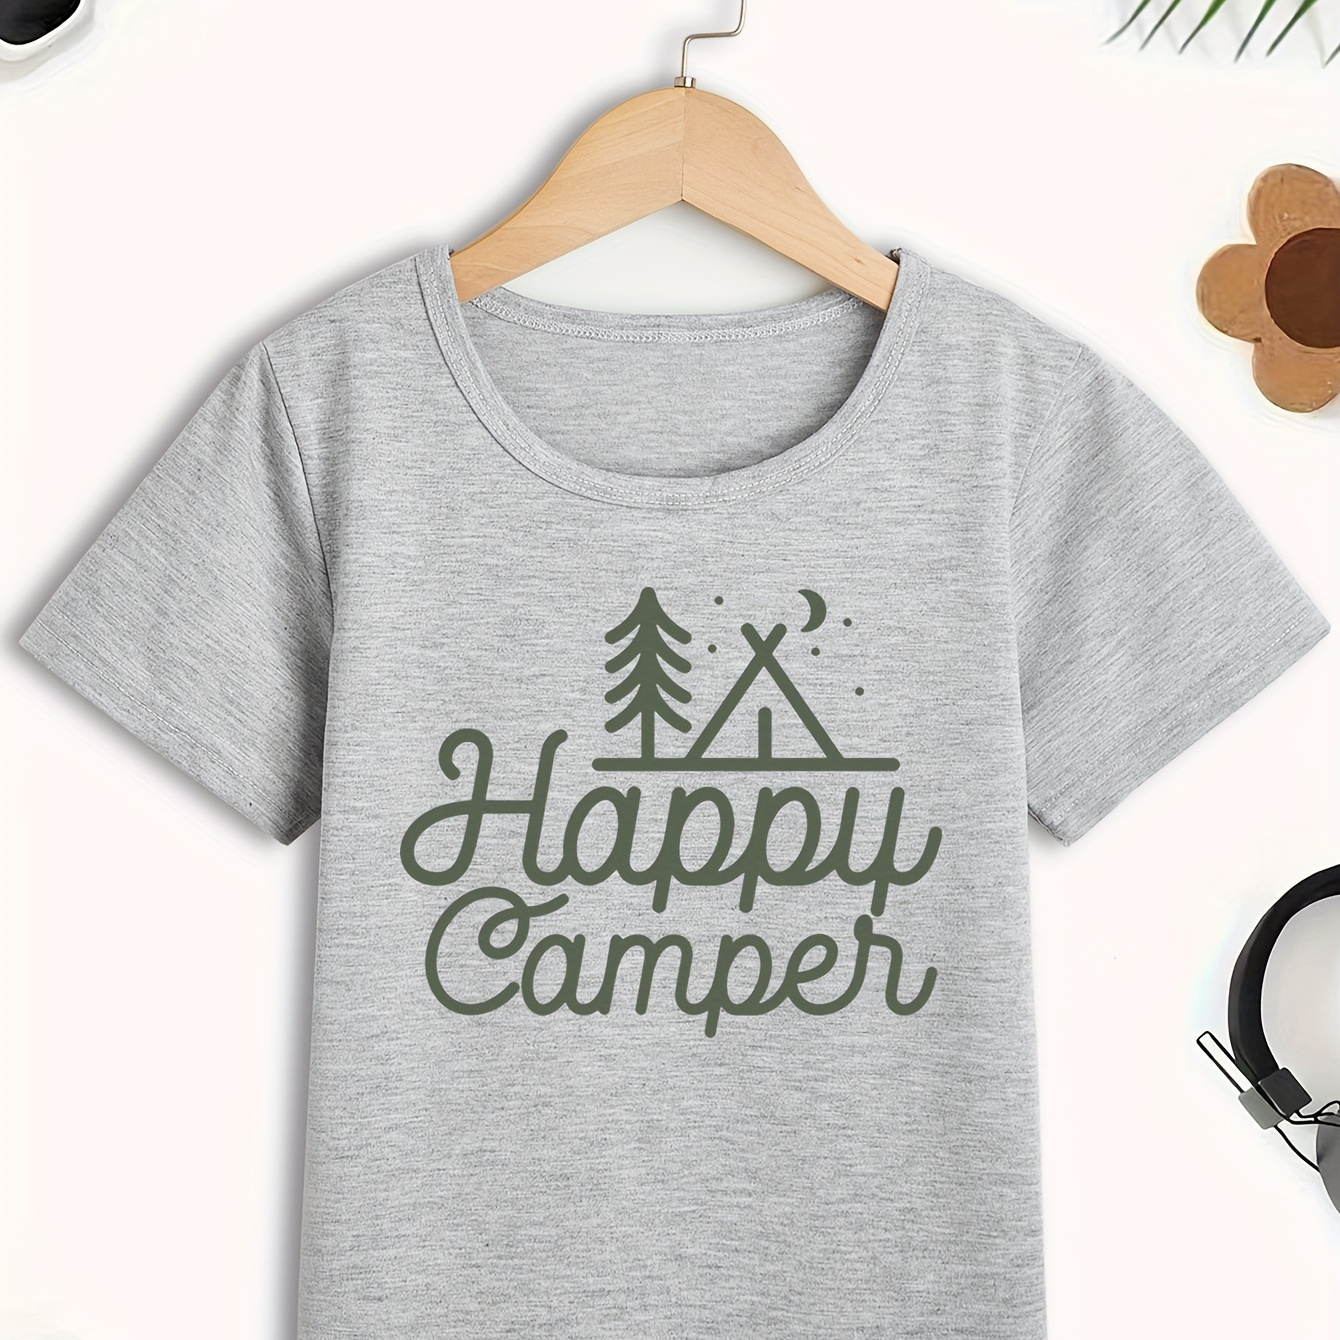 

Happy Camper & House With Tree Graphic Print Tee, Girls' Casual & Stylish Short Sleeve Crew Neck T-shirt For Spring & Summer, Girls' Clothes